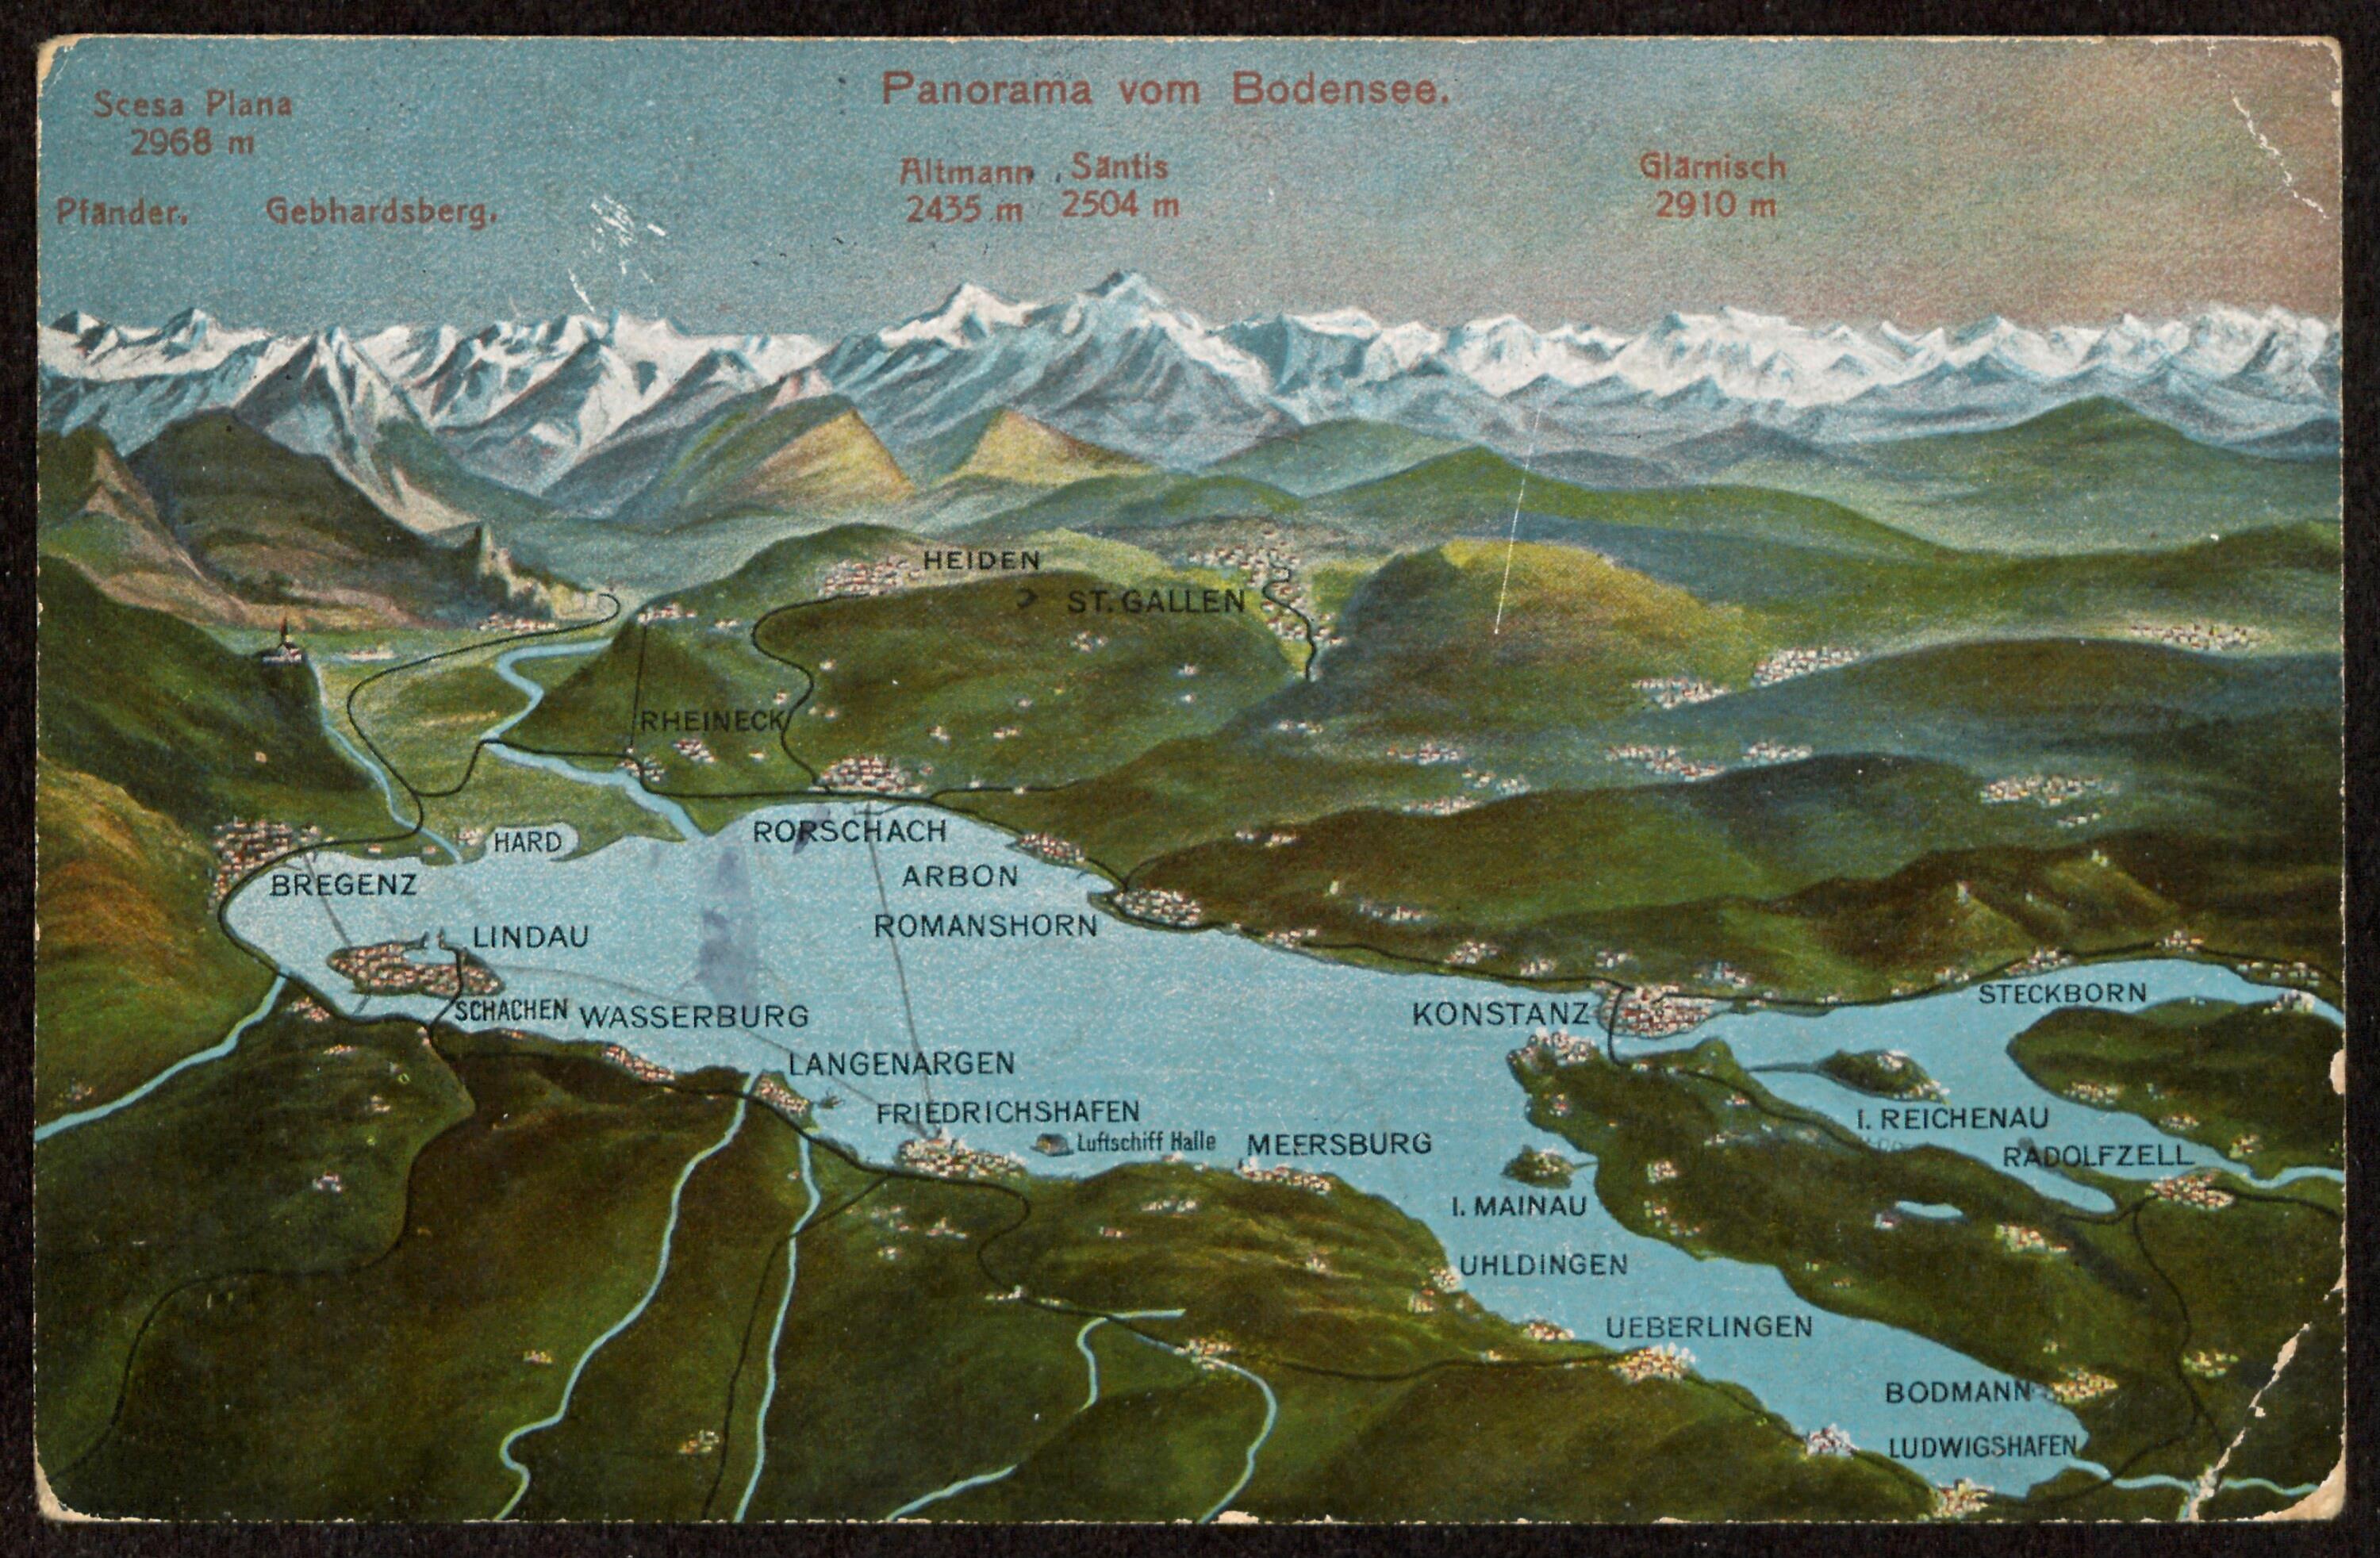 Panorama vom Bodensee></div>


    <hr>
    <div class=